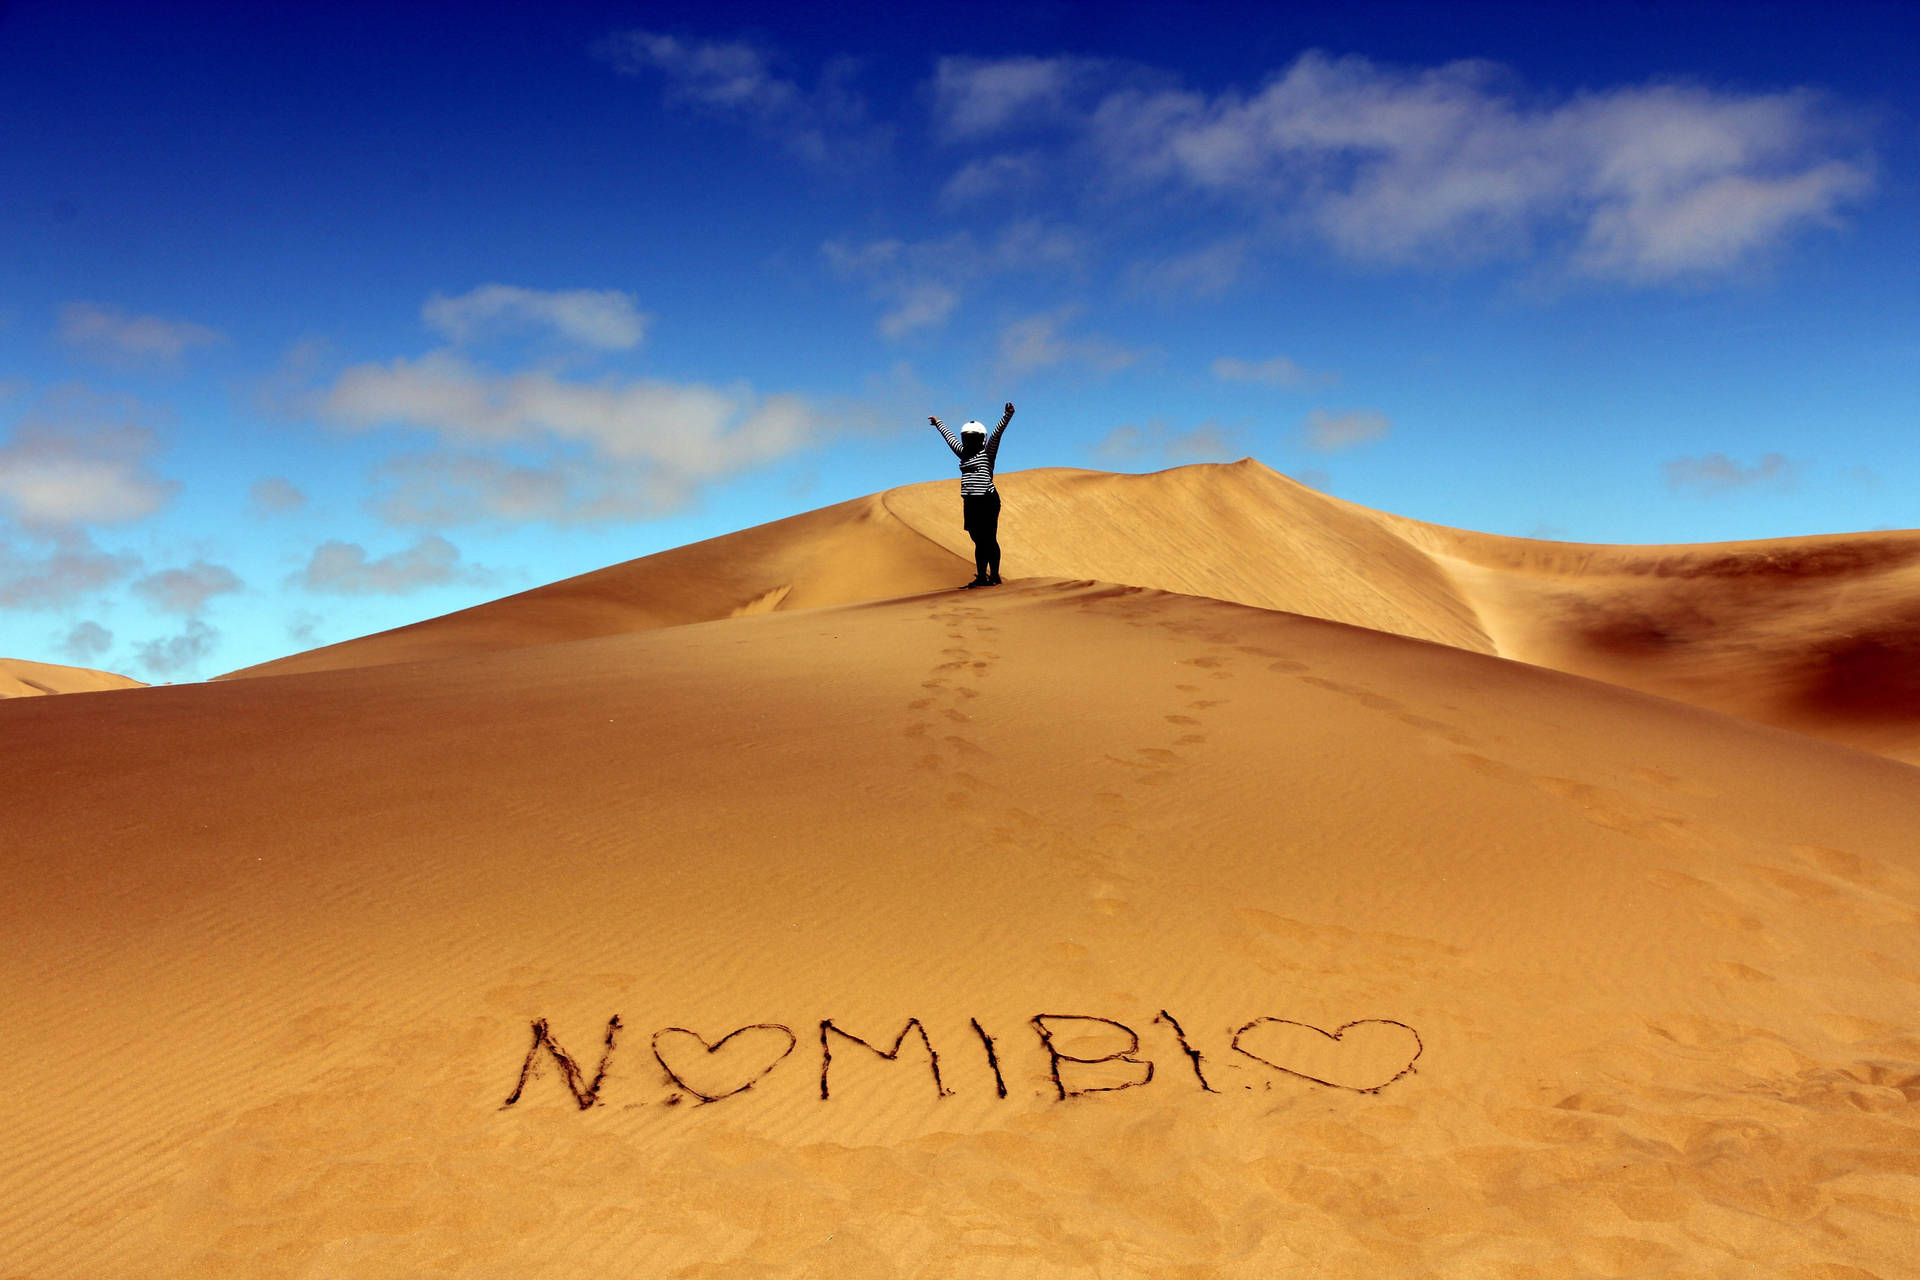 Namibia Dune Turiststed Wallpaper